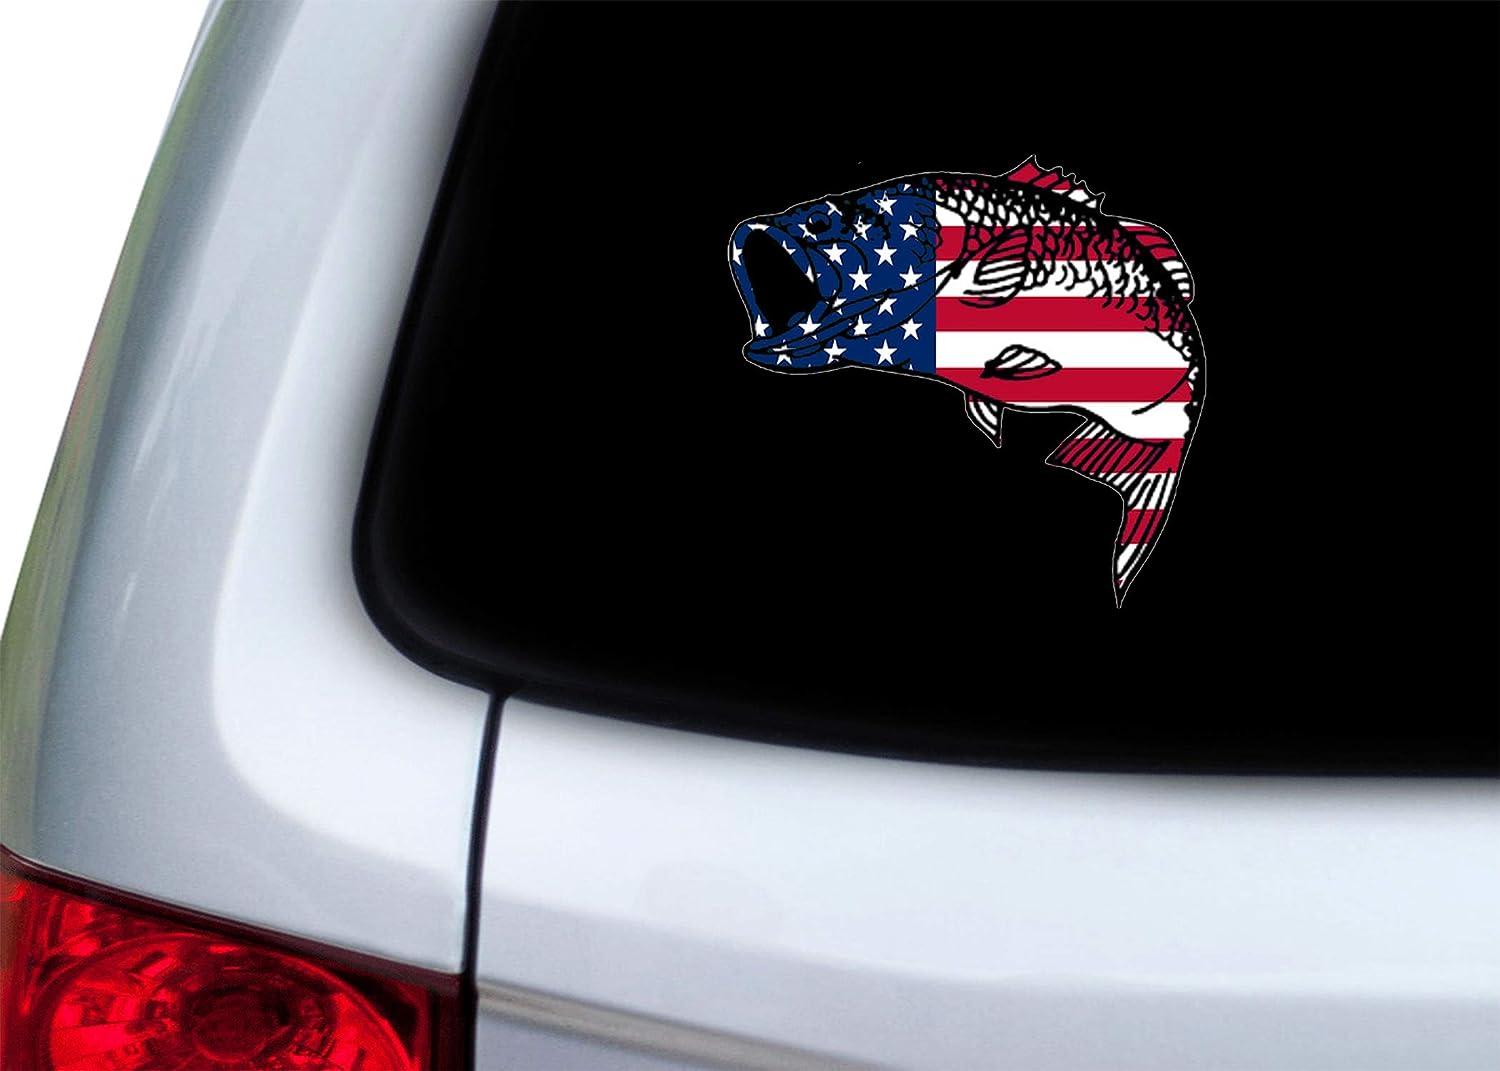 Rogue River Tactical Bass Fish USA Flag Sticker Decal Fishing Bumper Sticker  Fish Patriotic United Auto Decal Car Truck Boat RV Real Life Rod Tackle Box